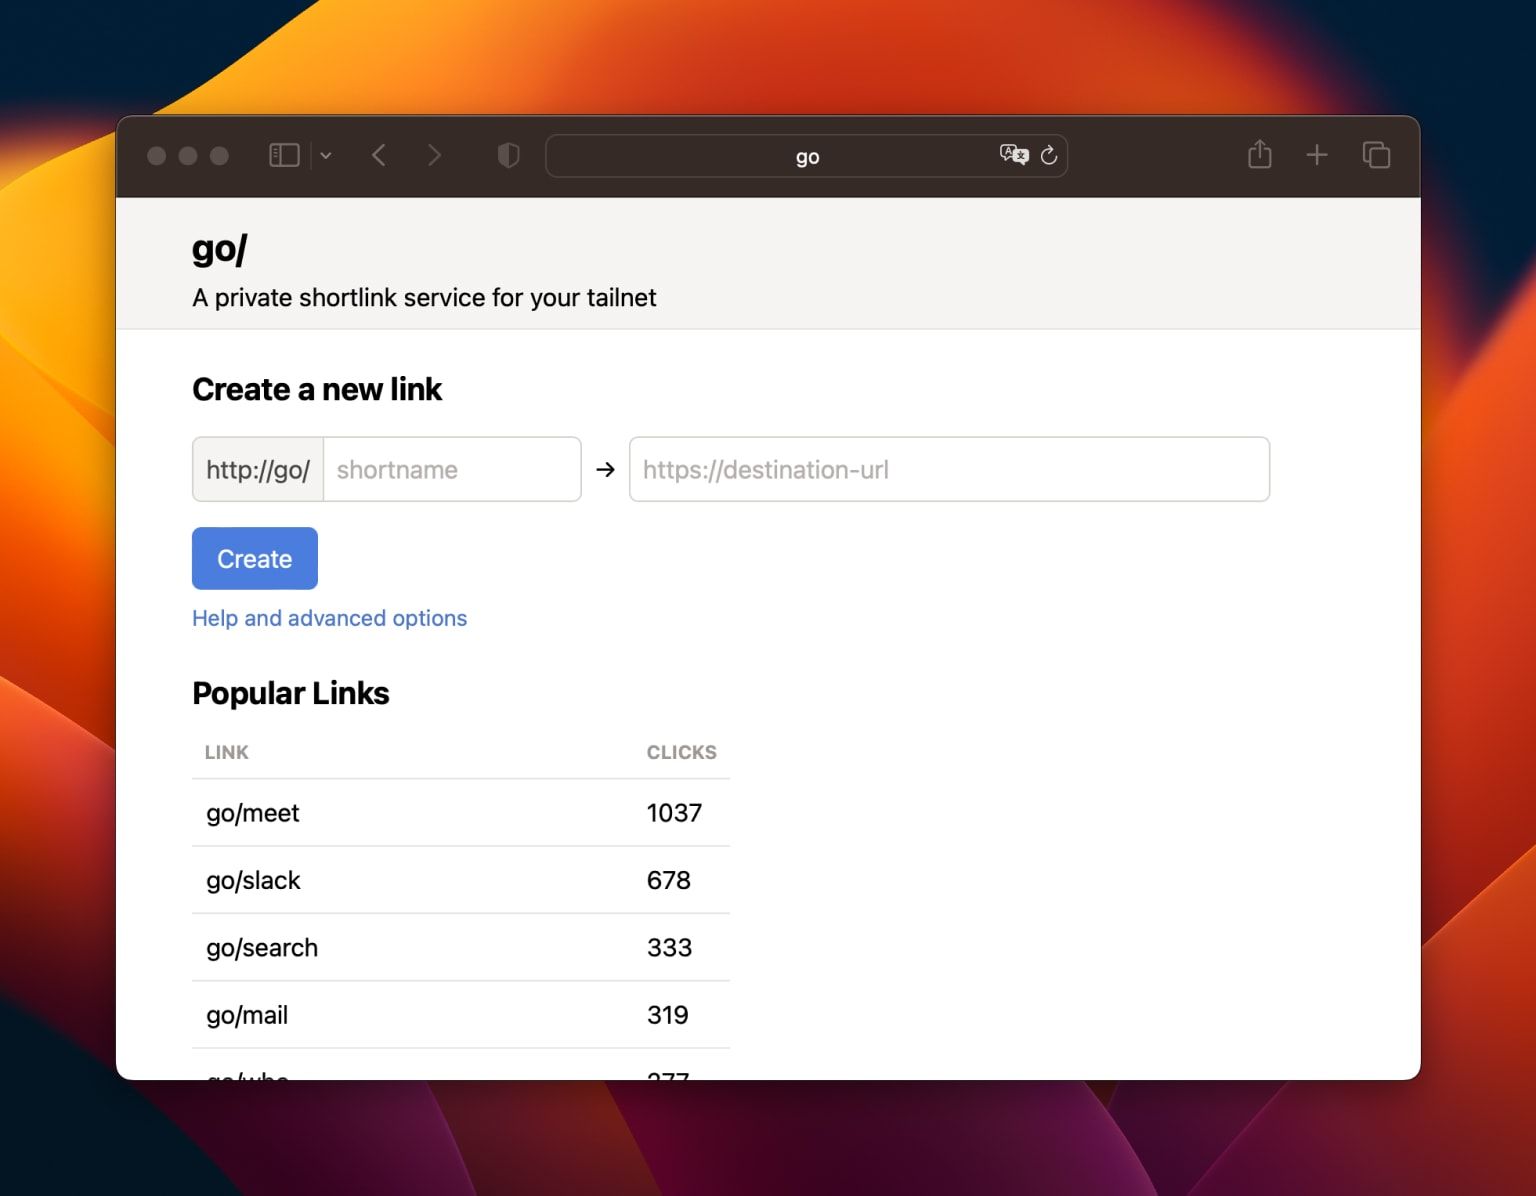 A screenshot of the golink application homepage. A form allows a new link to be created and popular links are listed: go/meet, go/slack, go/search, go/email